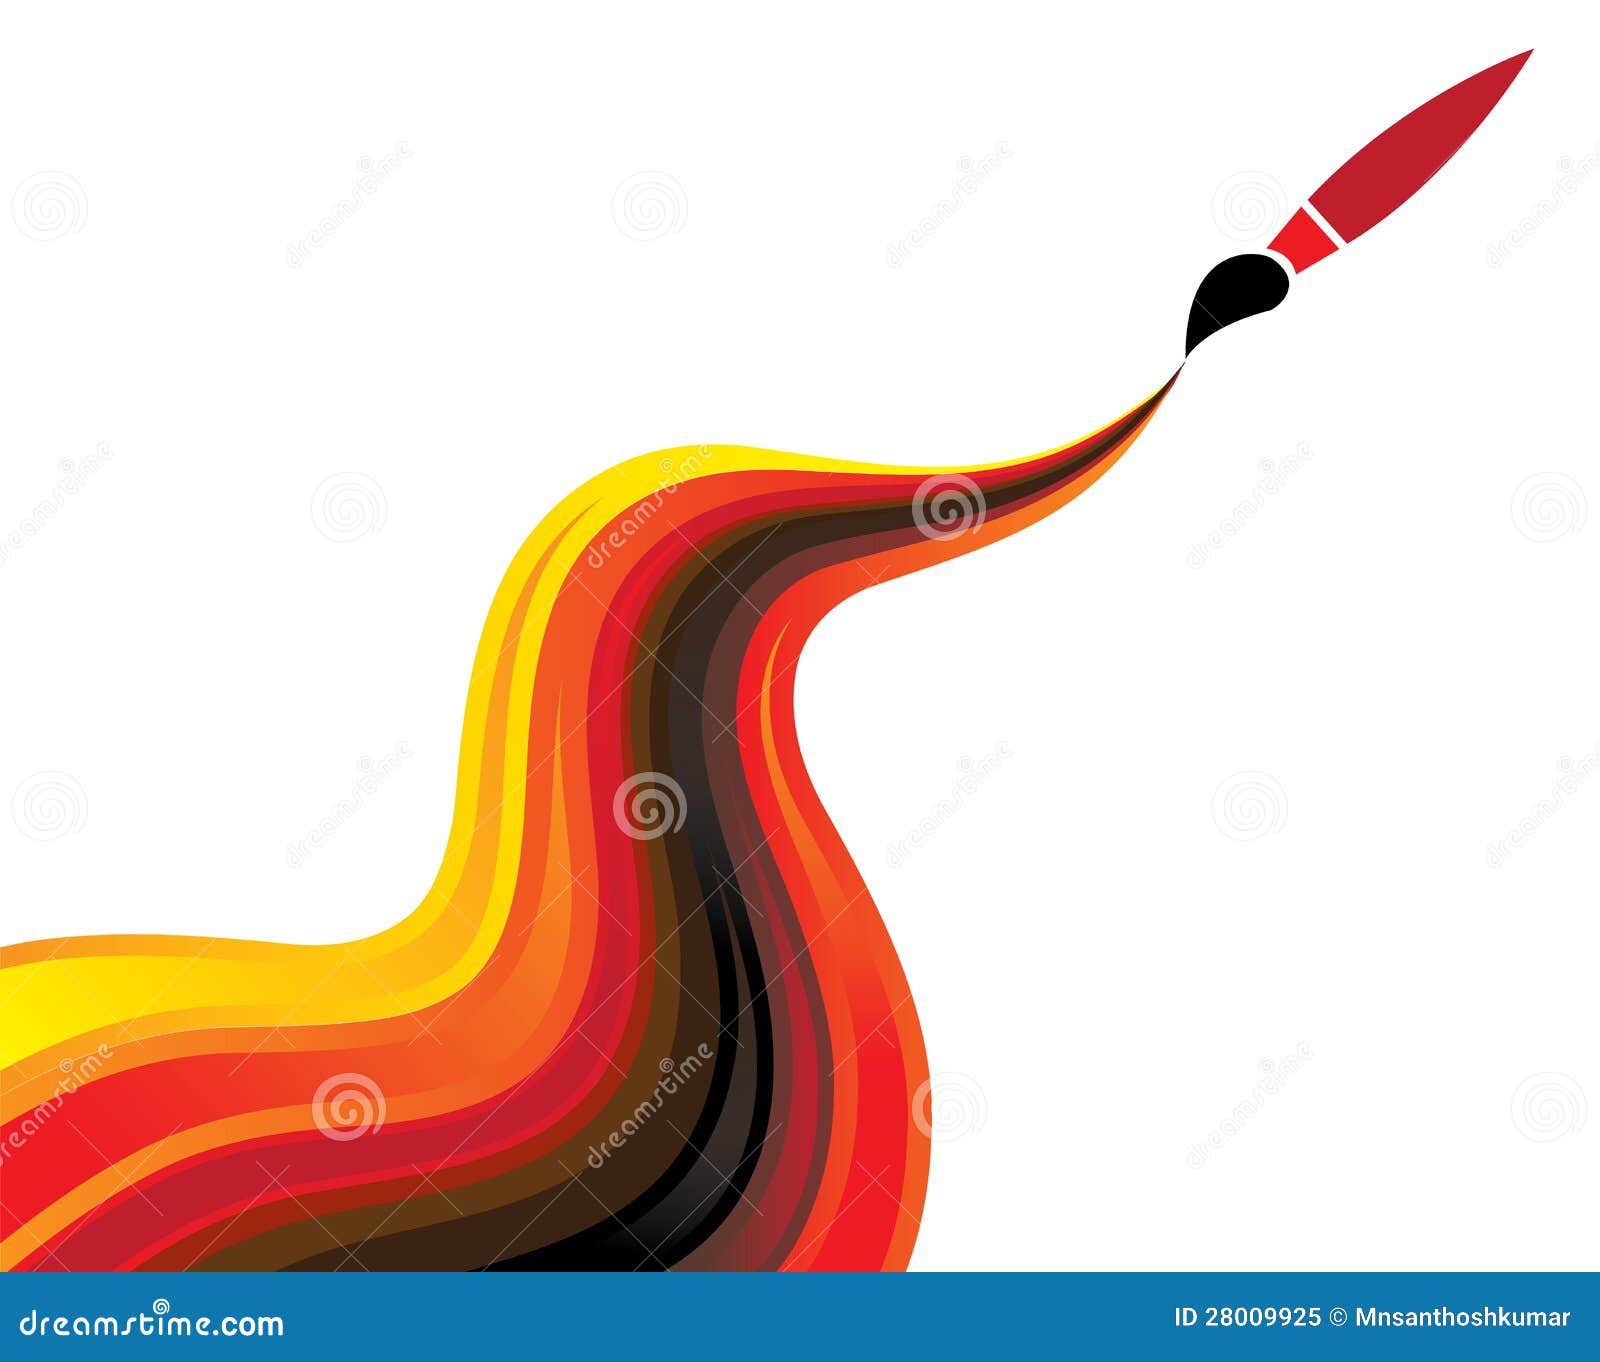  Concept  Illustration Of Flowing Paint  Brush Stock Vector 